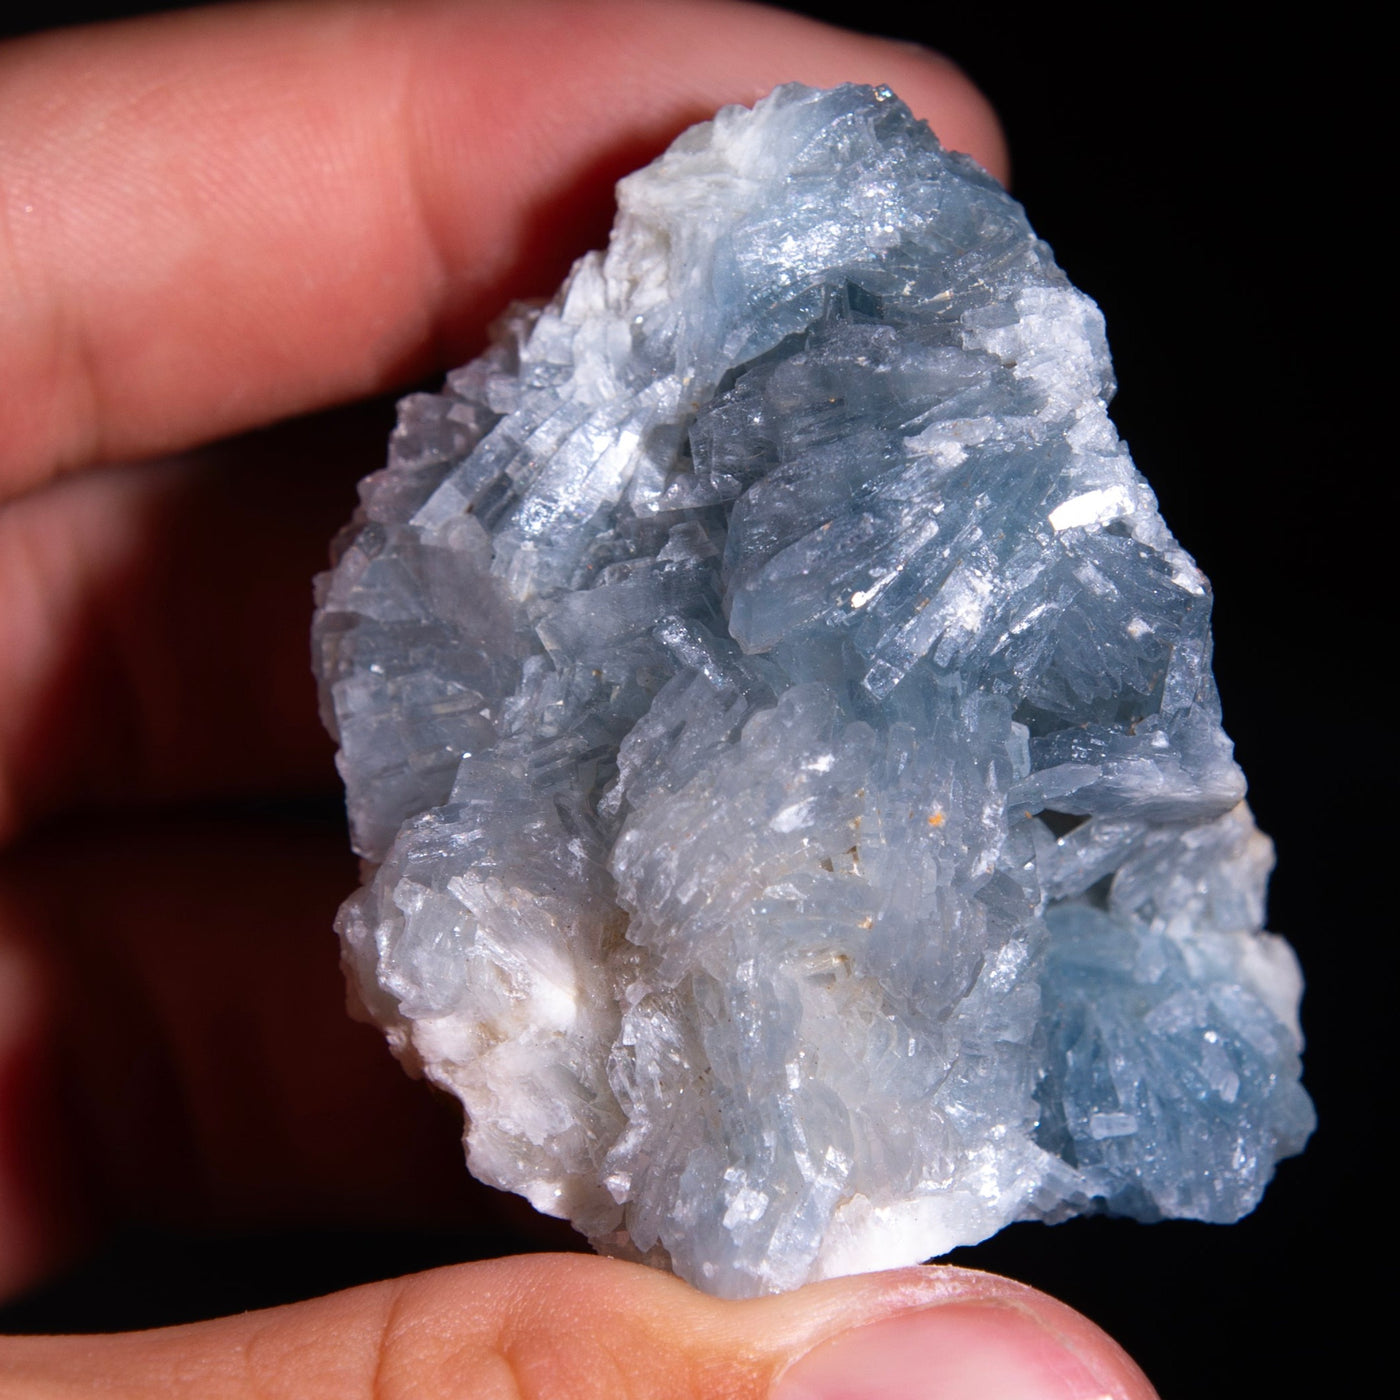 genuine Blue Barite Crystal in hand by Energy Muse